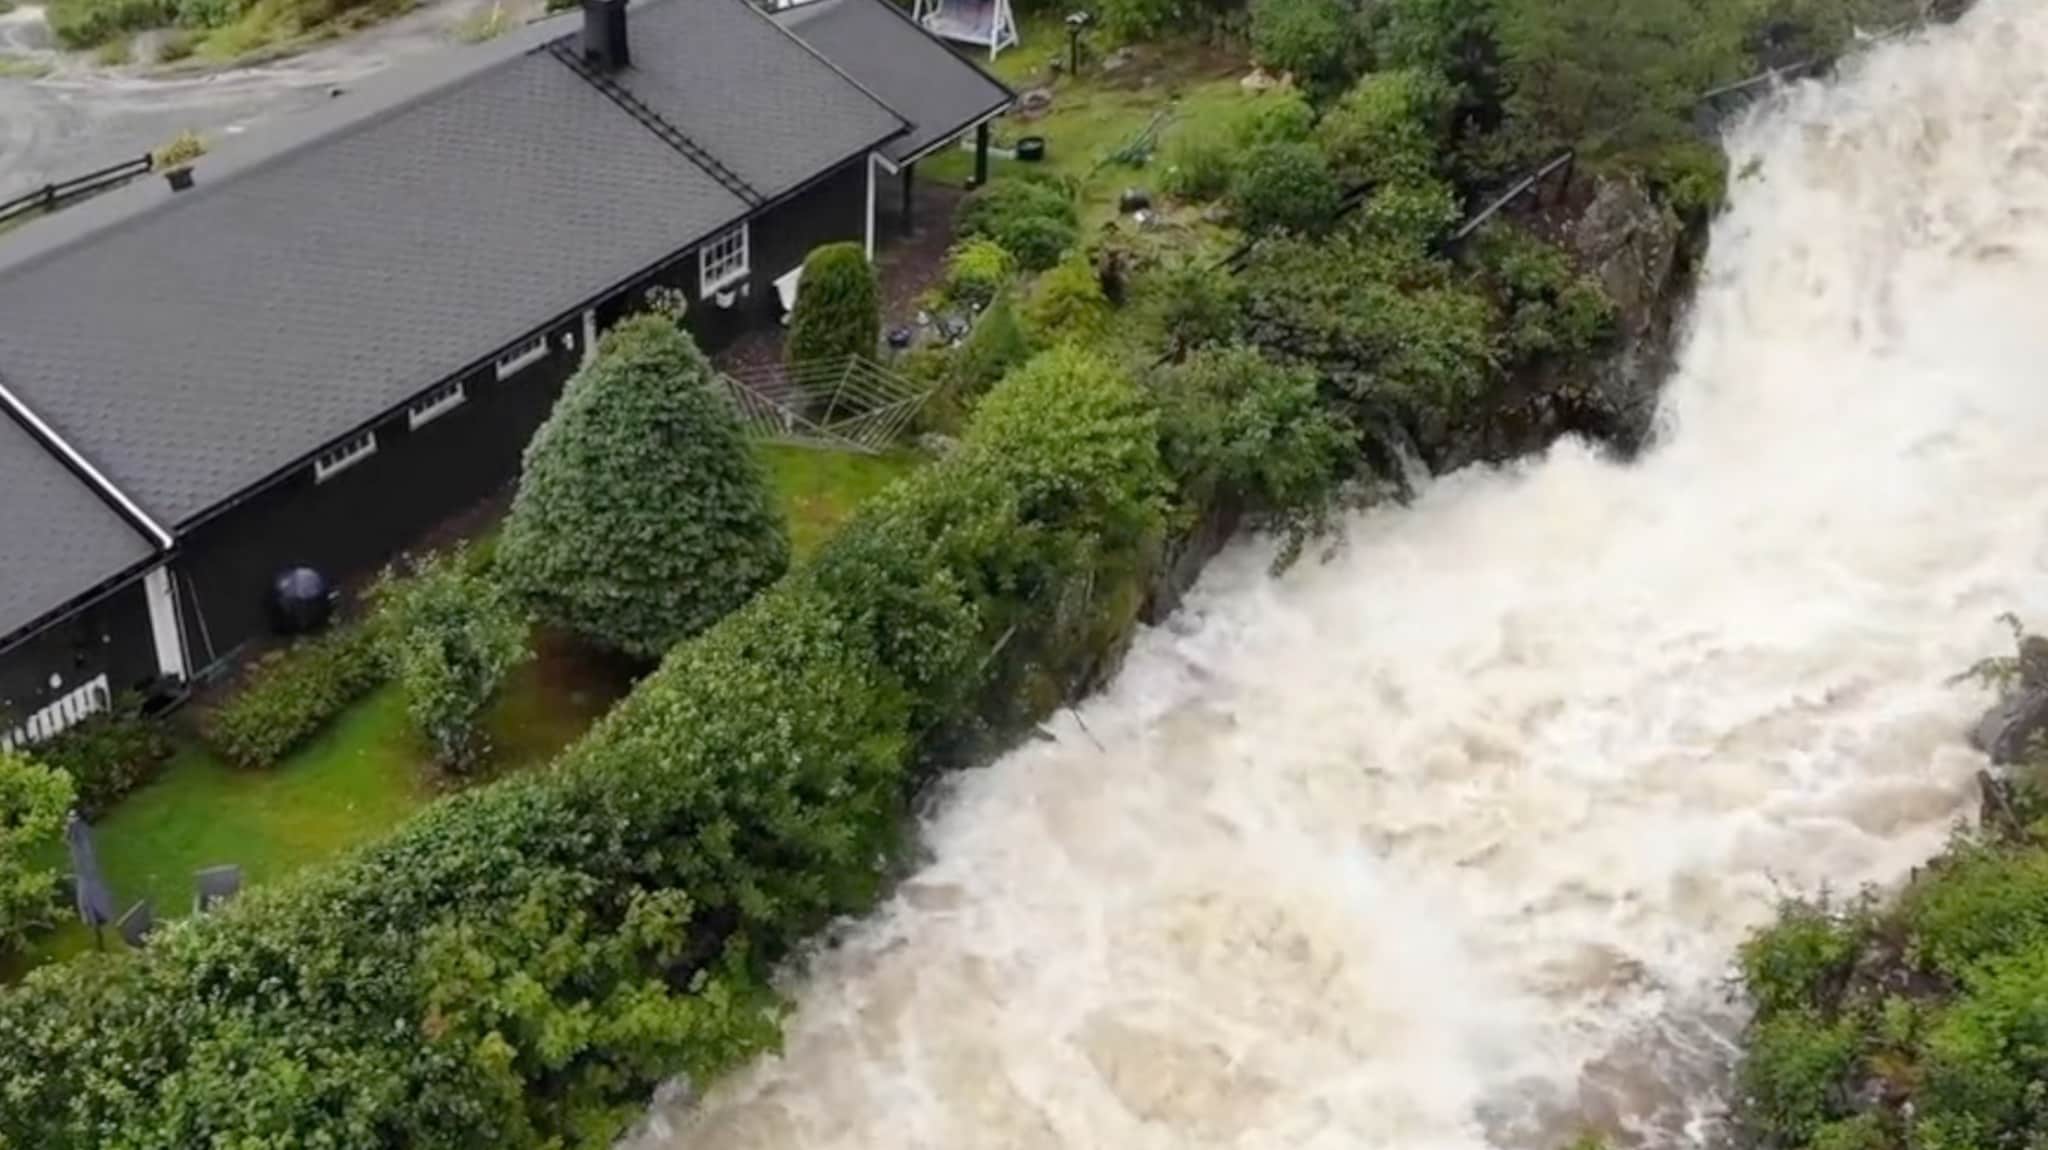 120 households evacuated in Søndre Land after extreme weather conditions “Hans”: – Not voluntarily